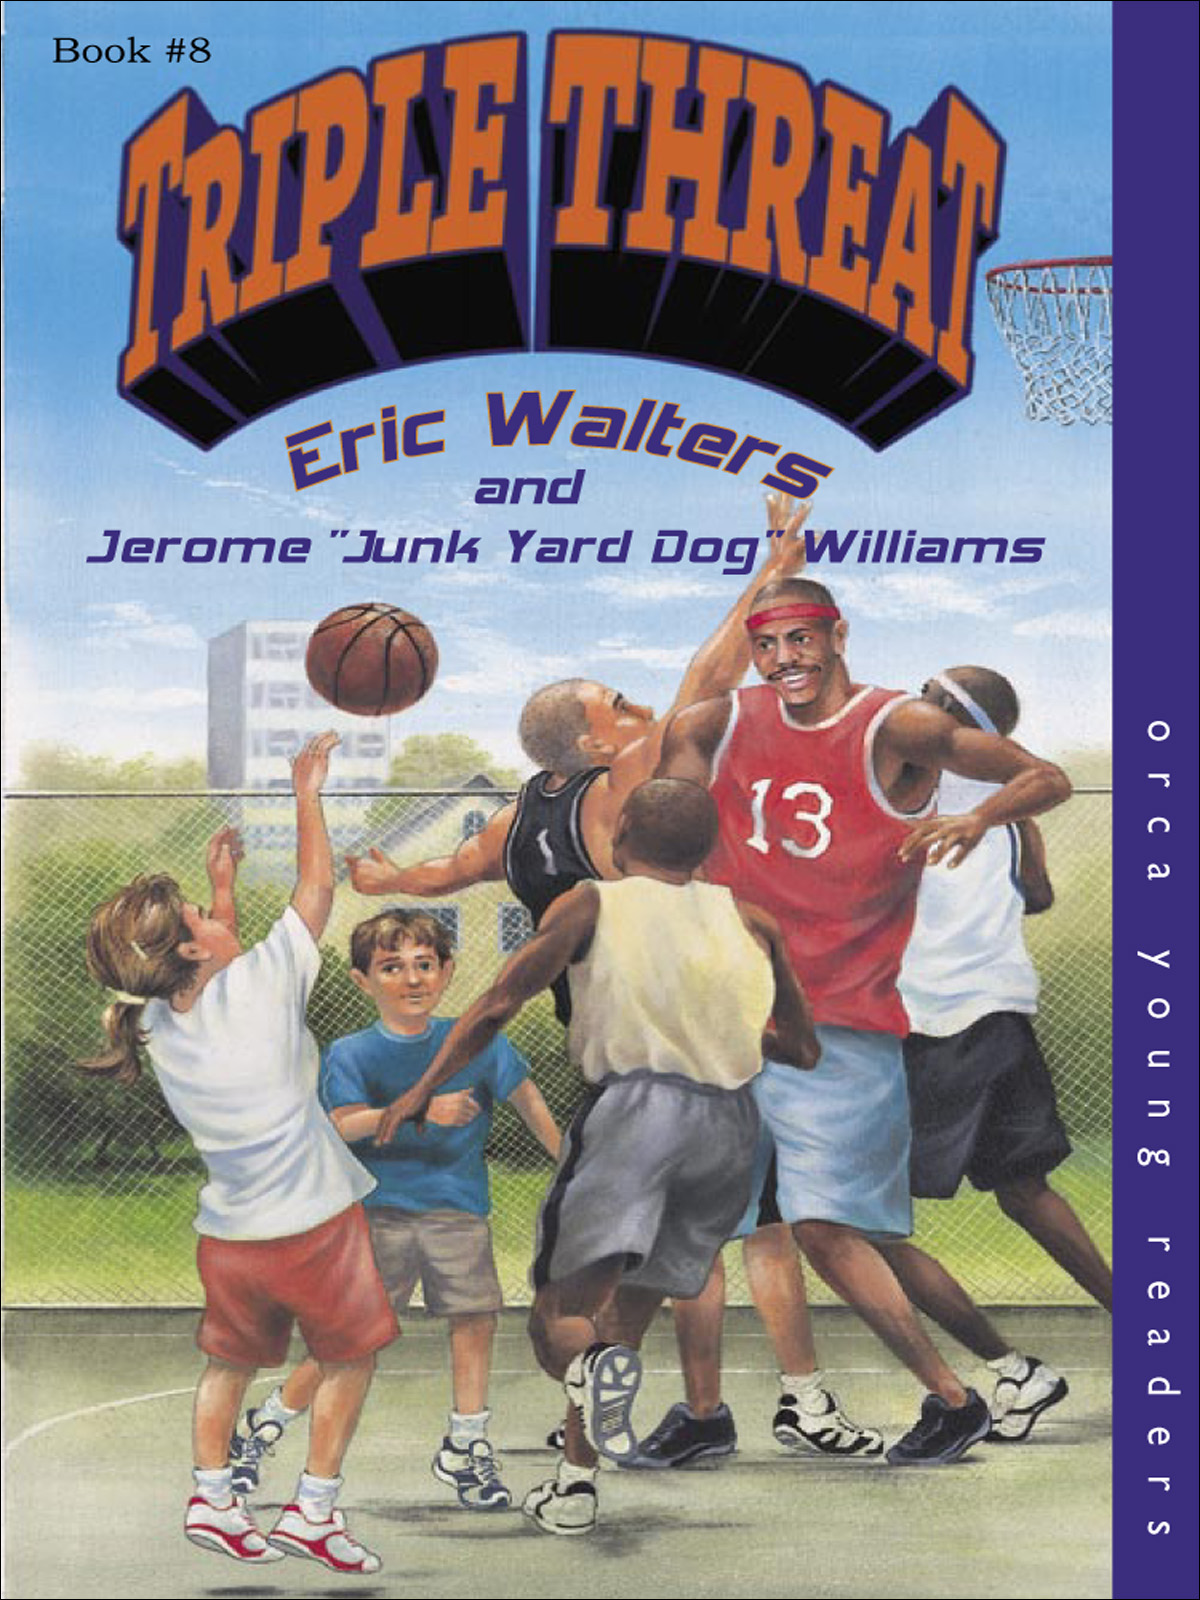 Triple Threat (2004) by Eric Walters